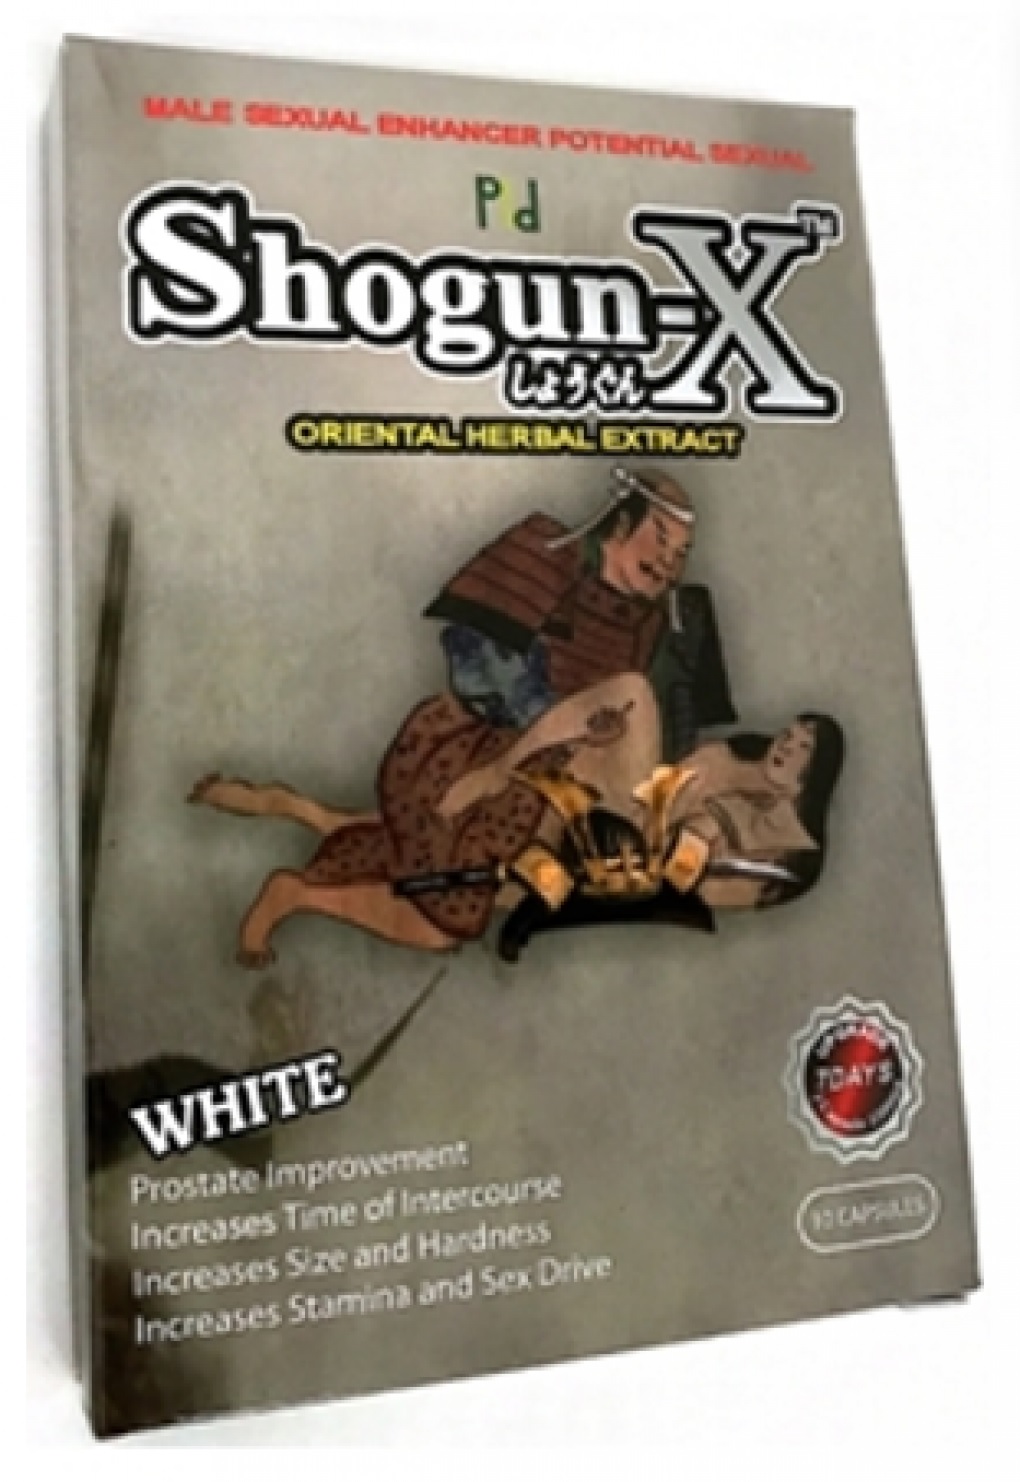 Image of the illigal product: Shogun-X 7000